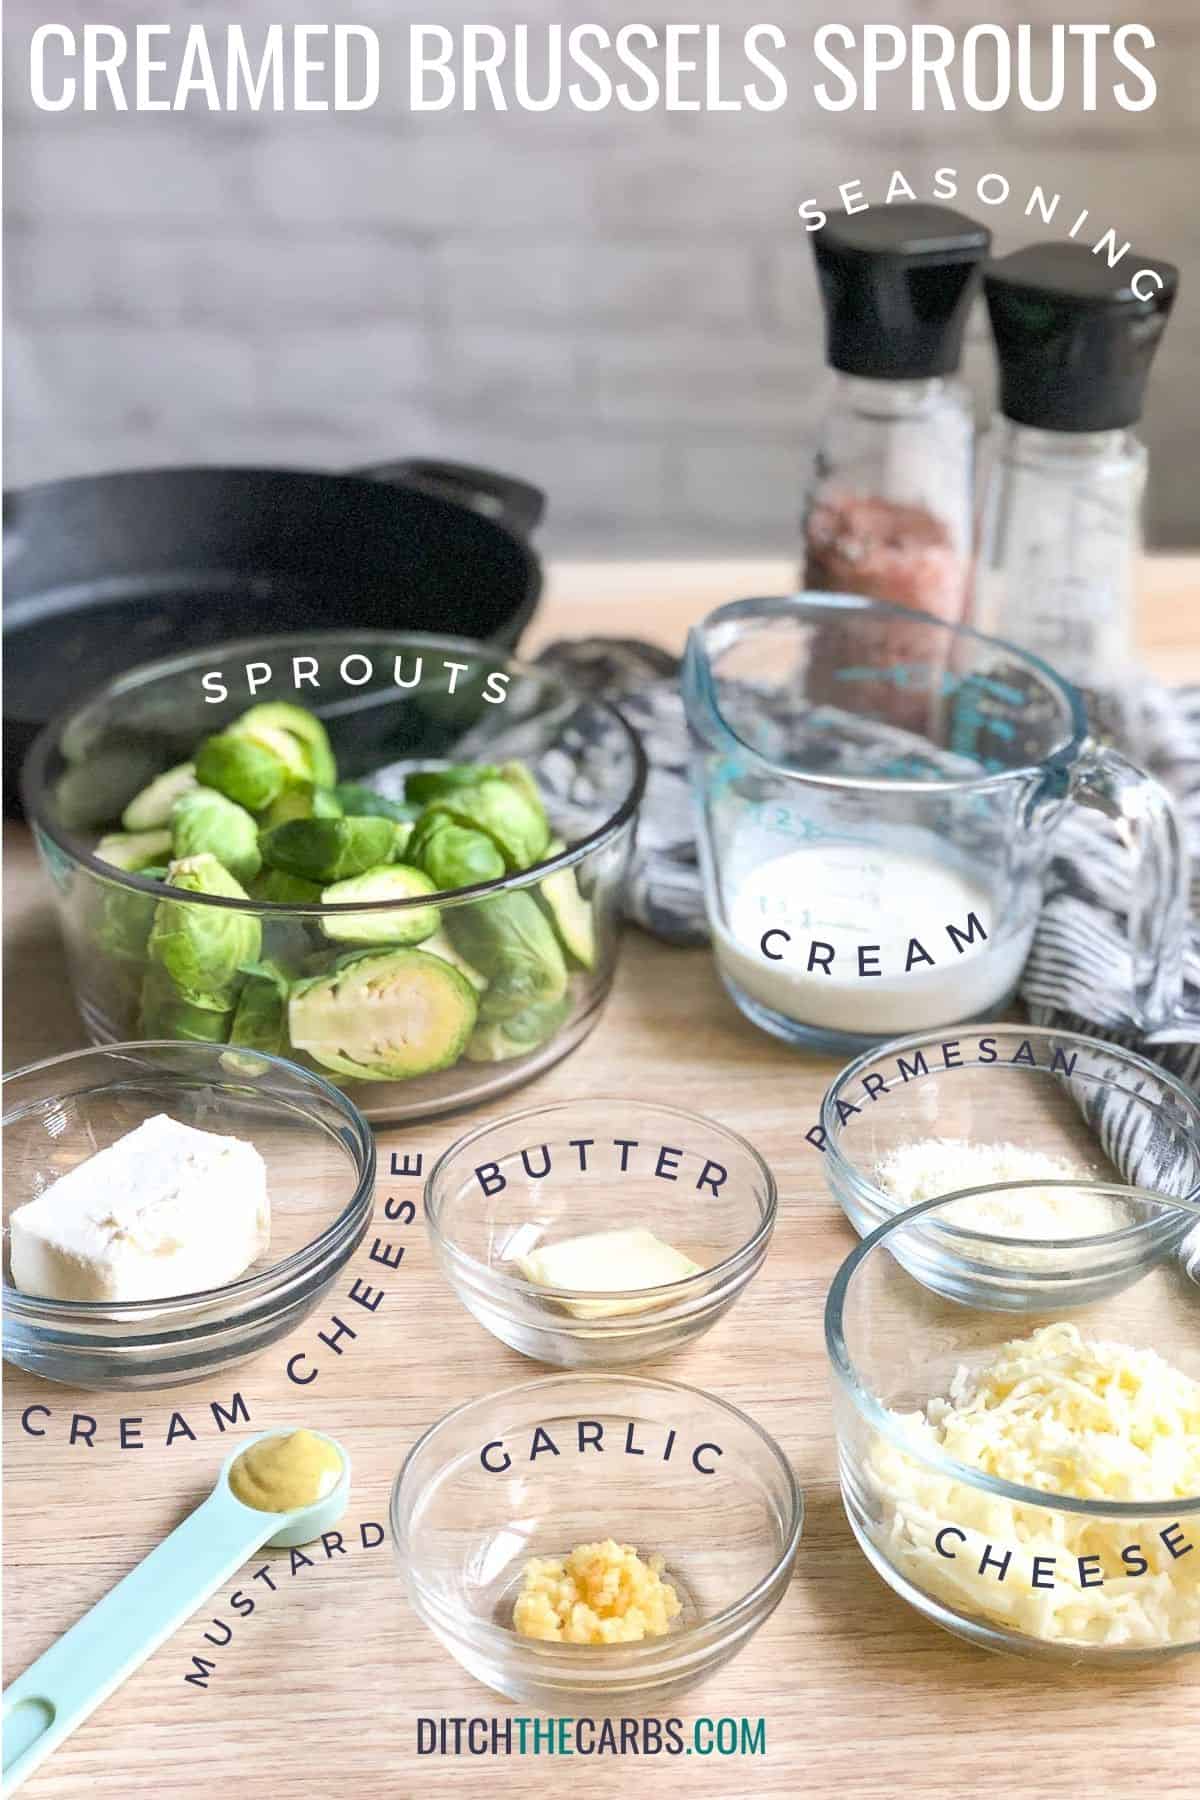 ingredients needed for creamed brussels sprouts